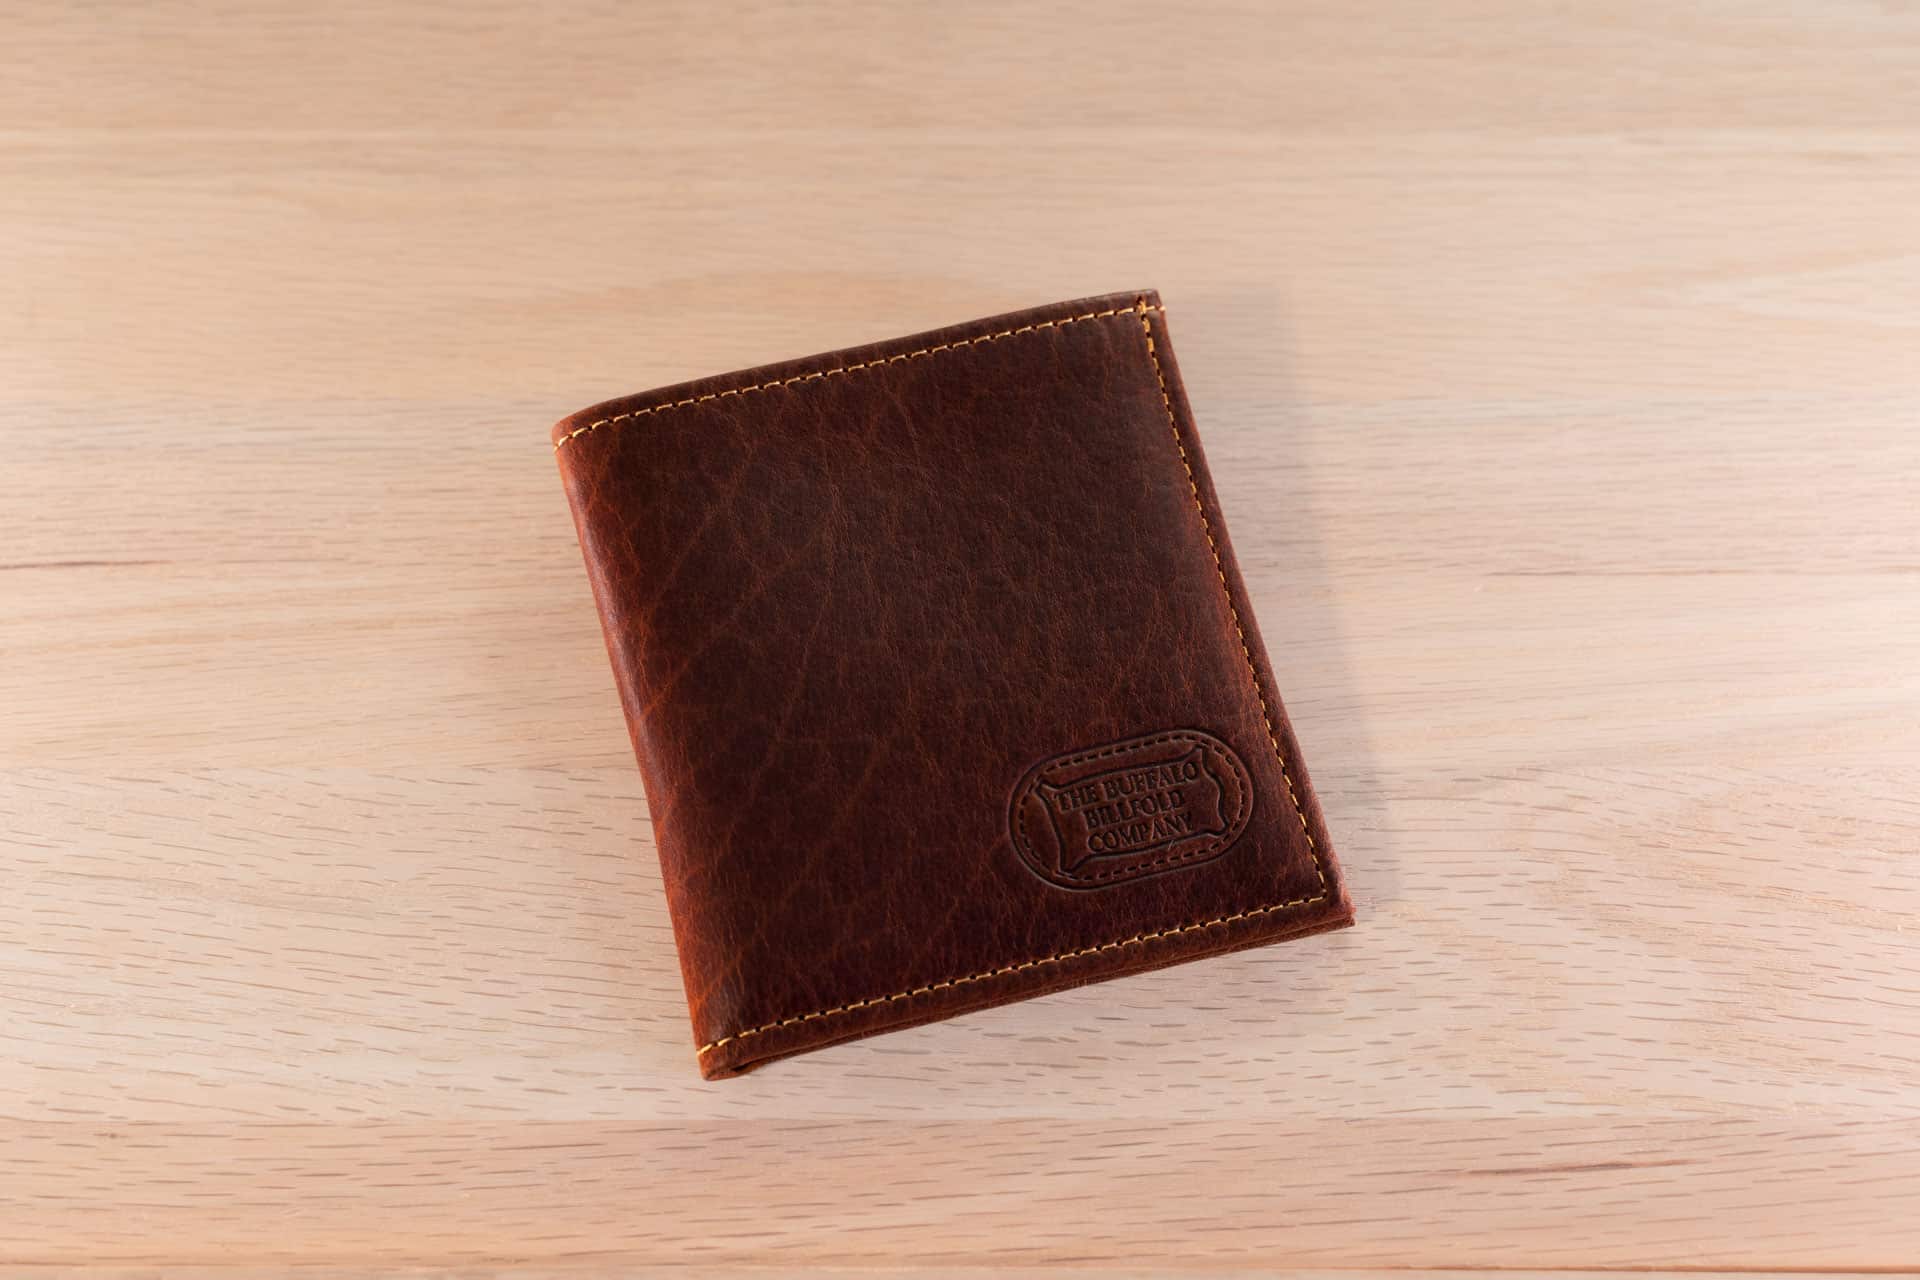 https://buffalobillfoldcompany.com/wp-content/uploads/2022/12/mens-hipster-wallet-leather-red-profile.jpg